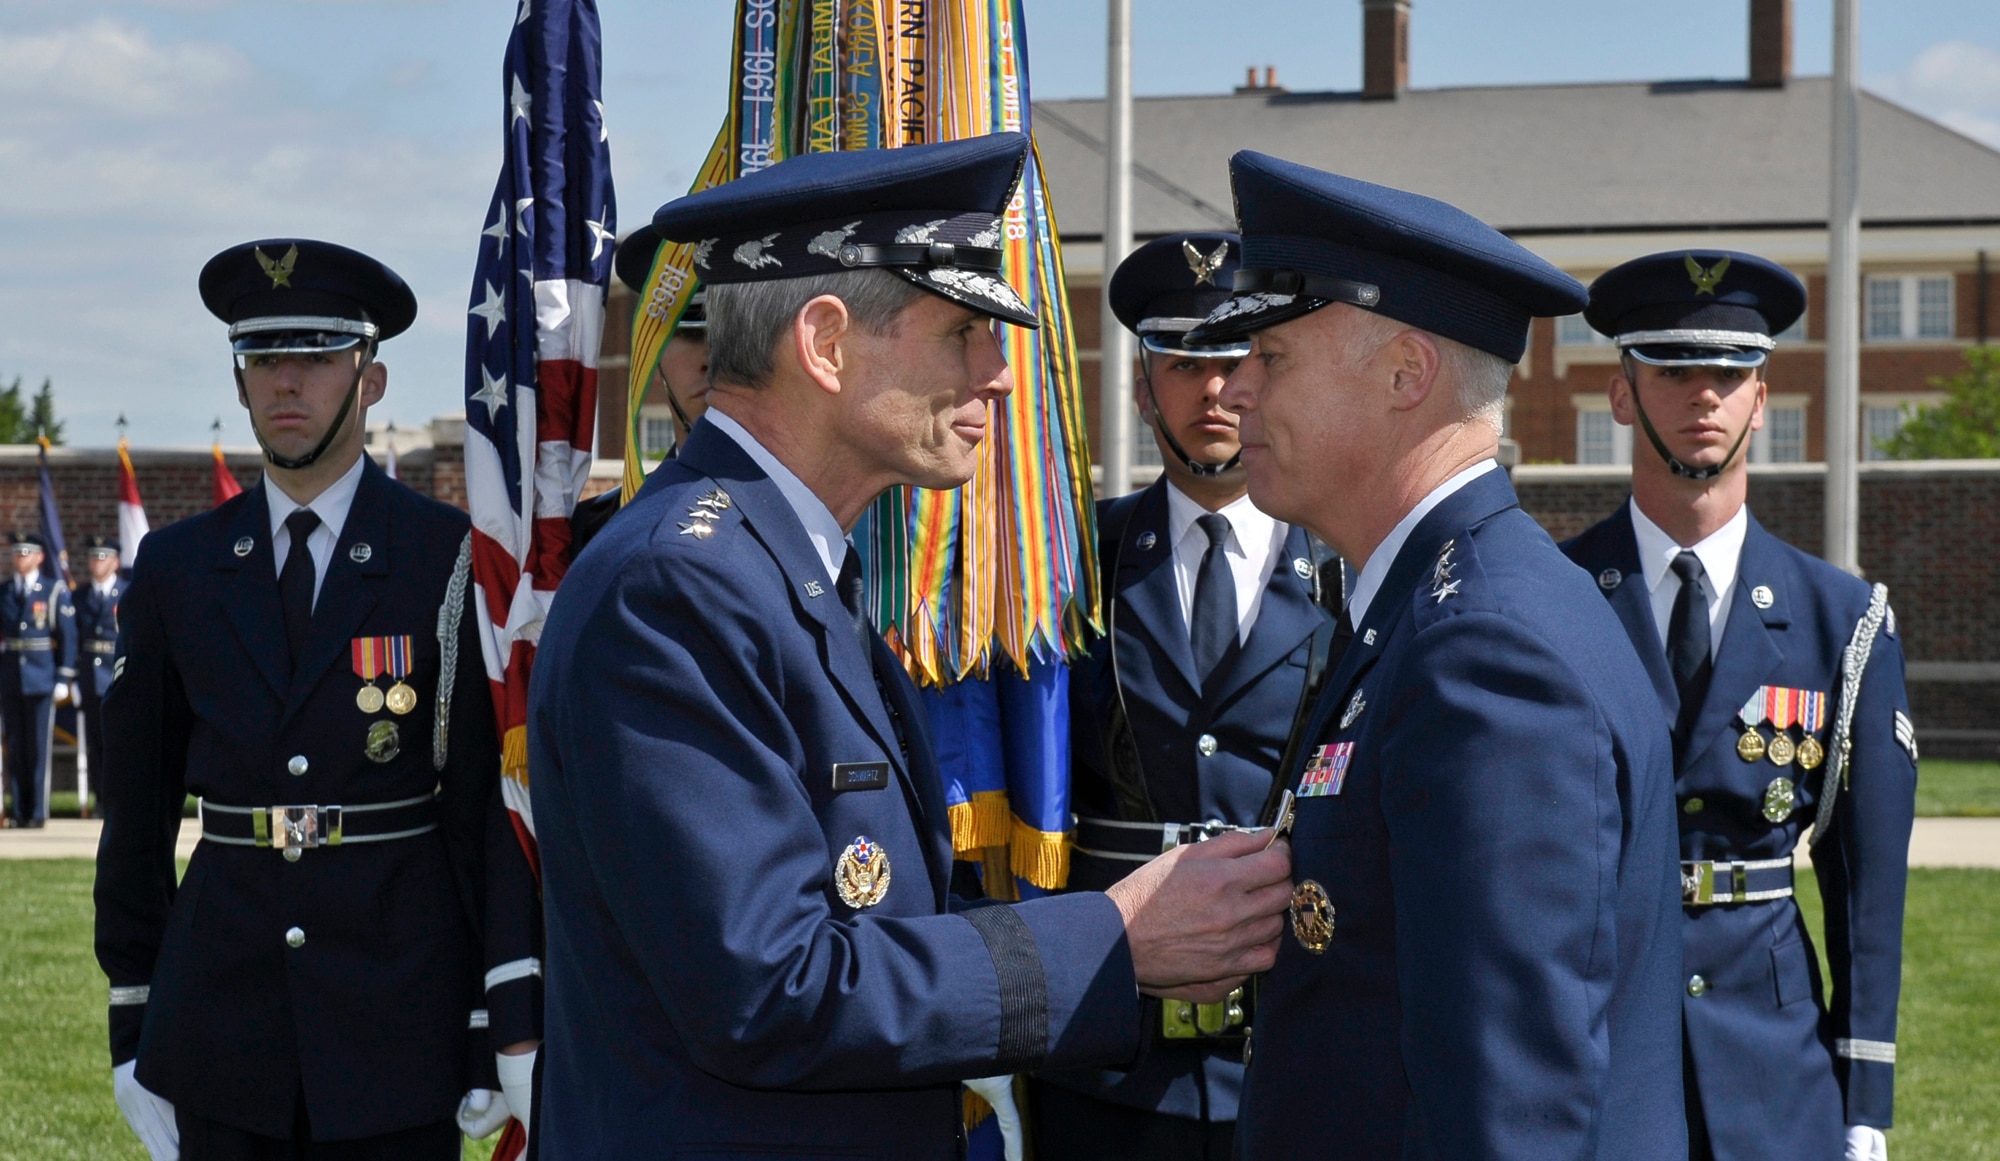 Air Force Chief of Staff Gen. Norton Schwartz awards Lt. Gen. Richard Y. Newton III, Assistant Vice Chief of Staff and Director, Air Staff, Headquarters U.S. Air Force, the Distinguished Service Medal at his retirement ceremony on Joint Base Anacostia-Bolling, D.C., on April 27, 2012.  Newton retires after 34 years of active military service.  (U.S. Air  Force photo/Michael J. Pausic)